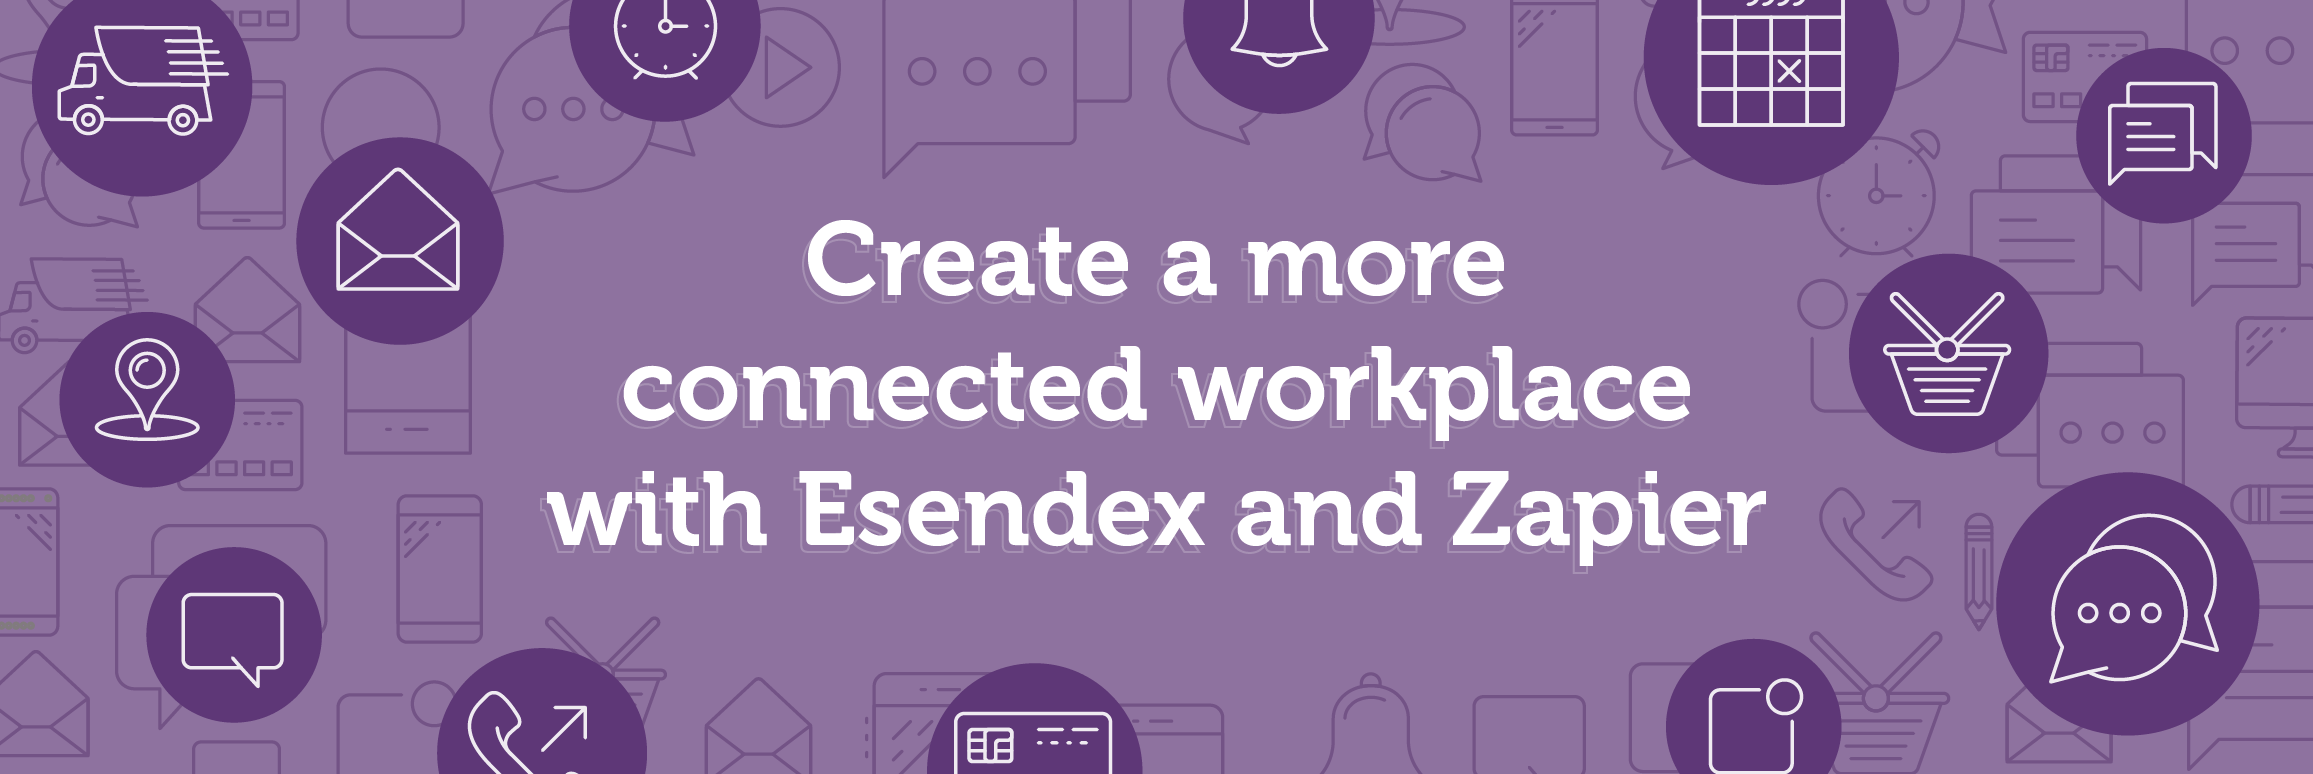 Create a more connected workplace with Esendex and Zapier